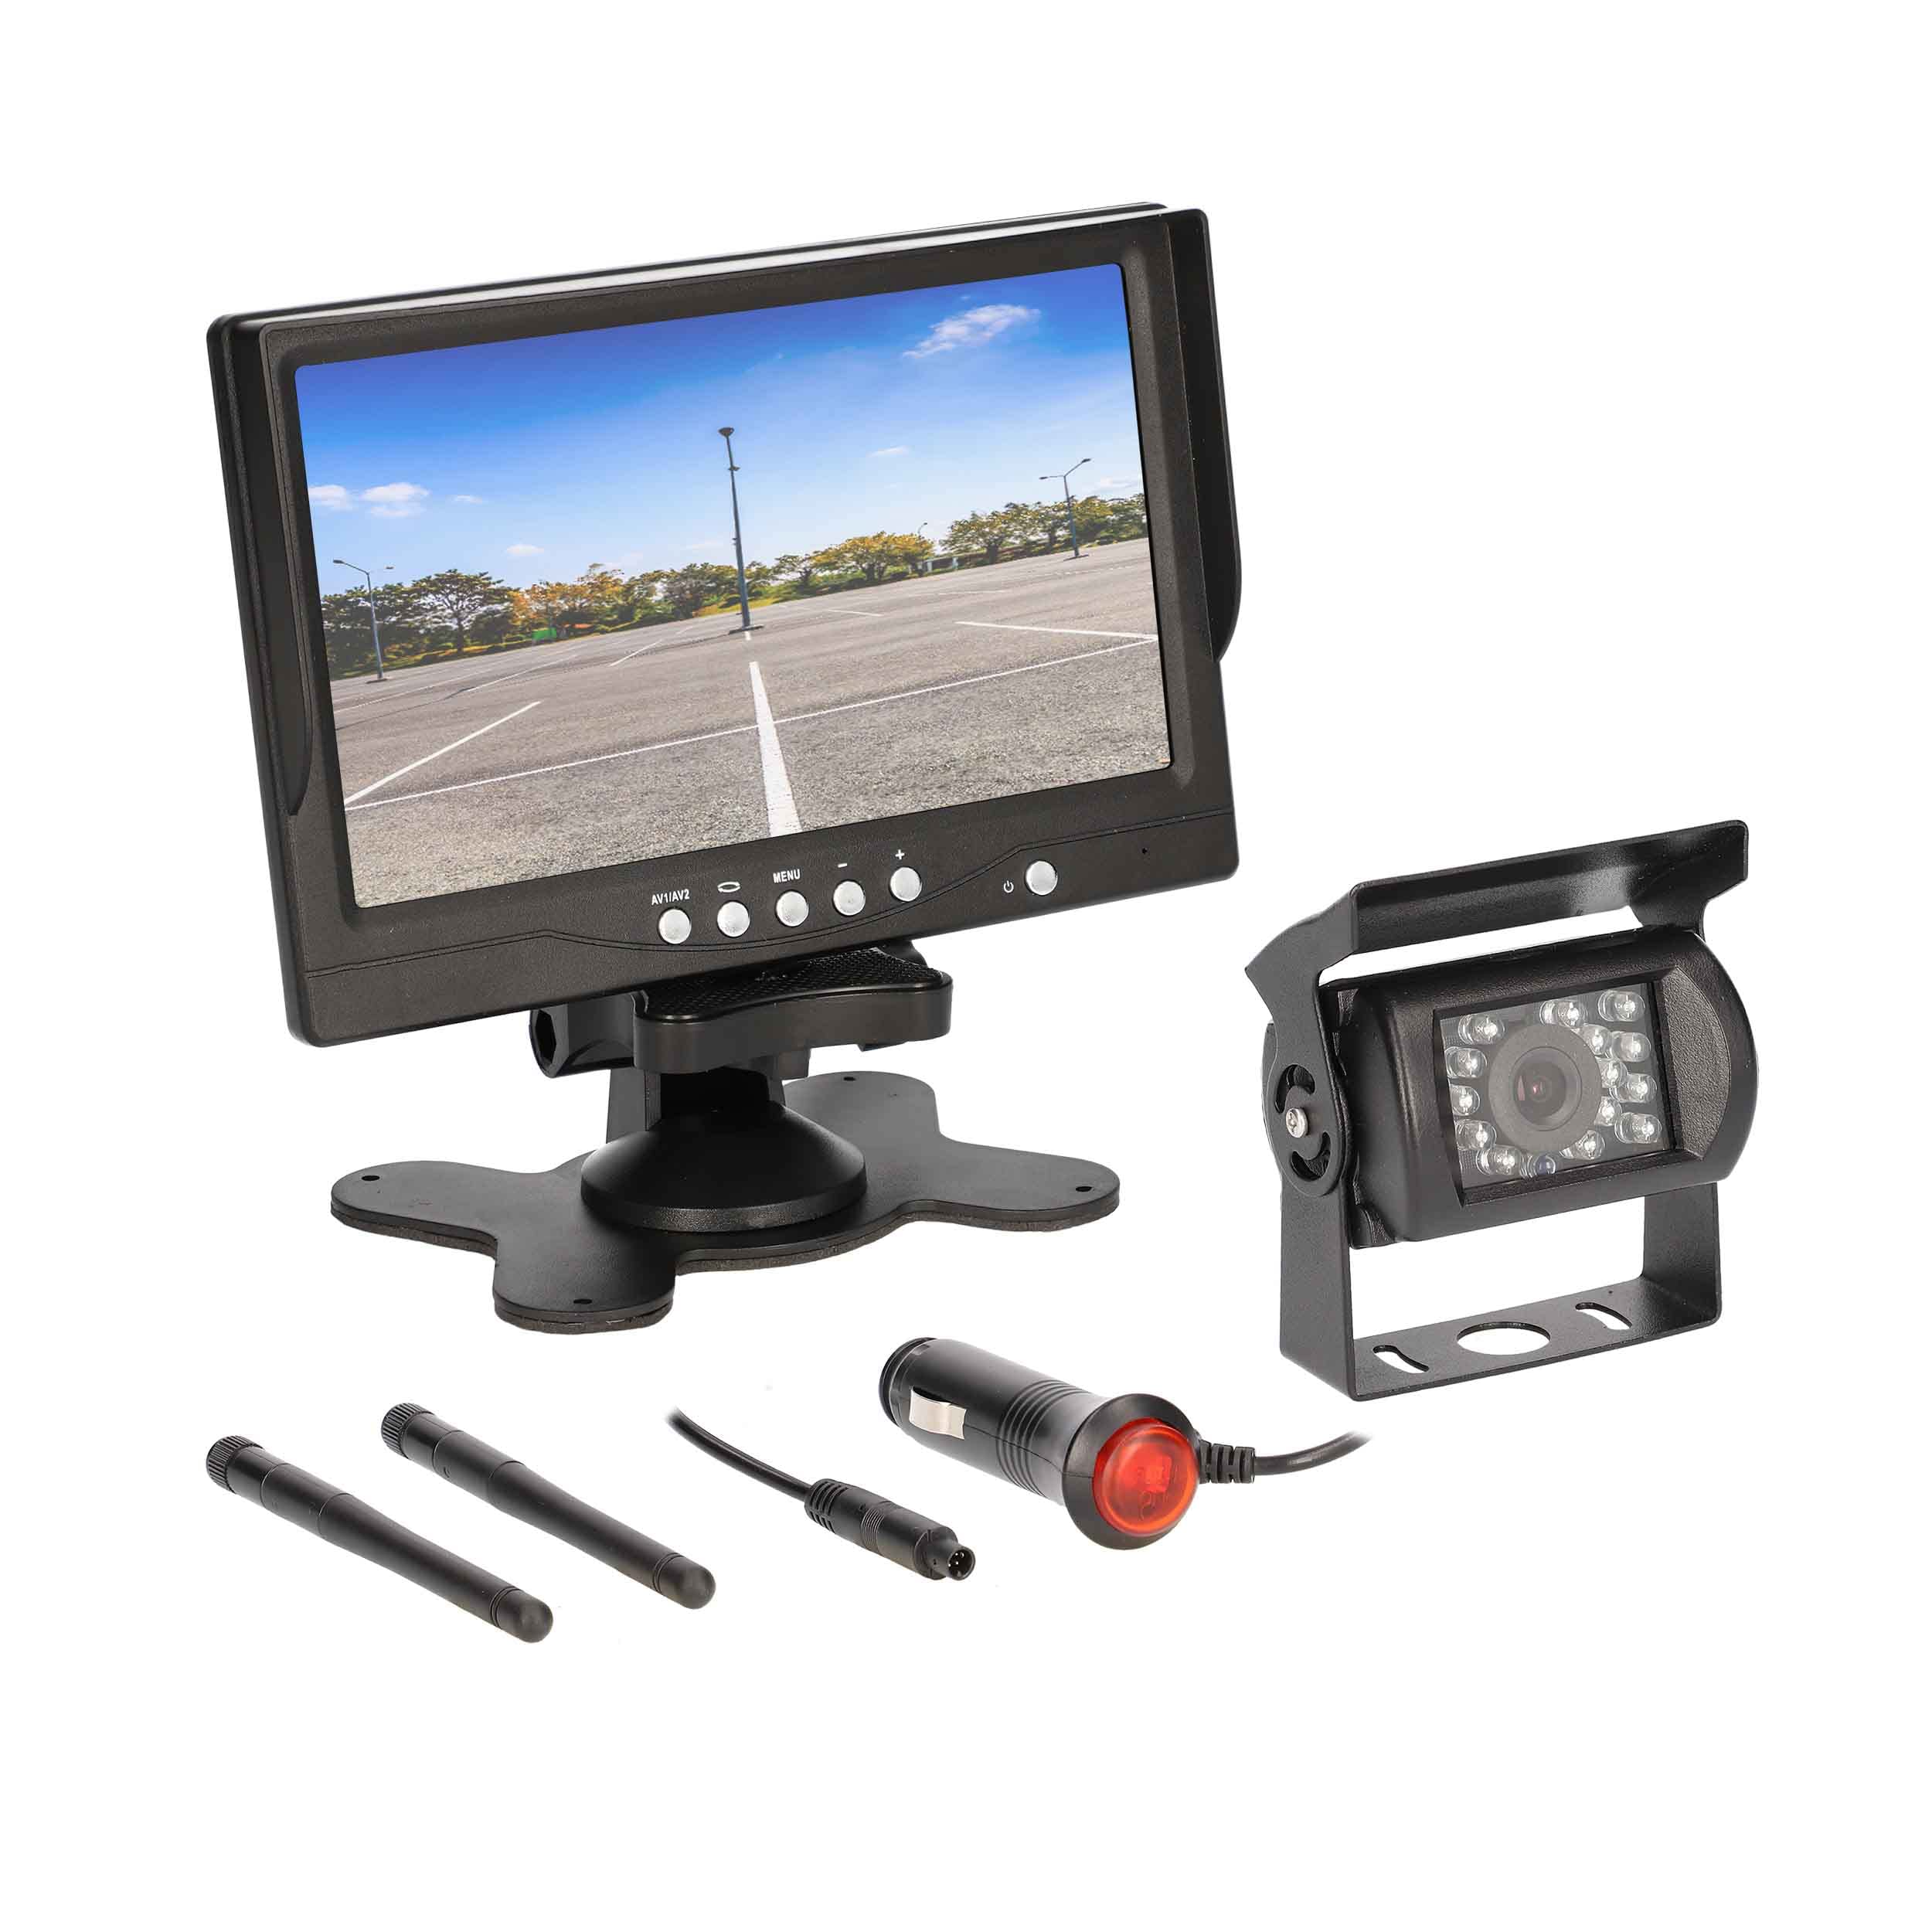 Ibeam Universal Wireless 7 Inch Monitor and Commercial Camera